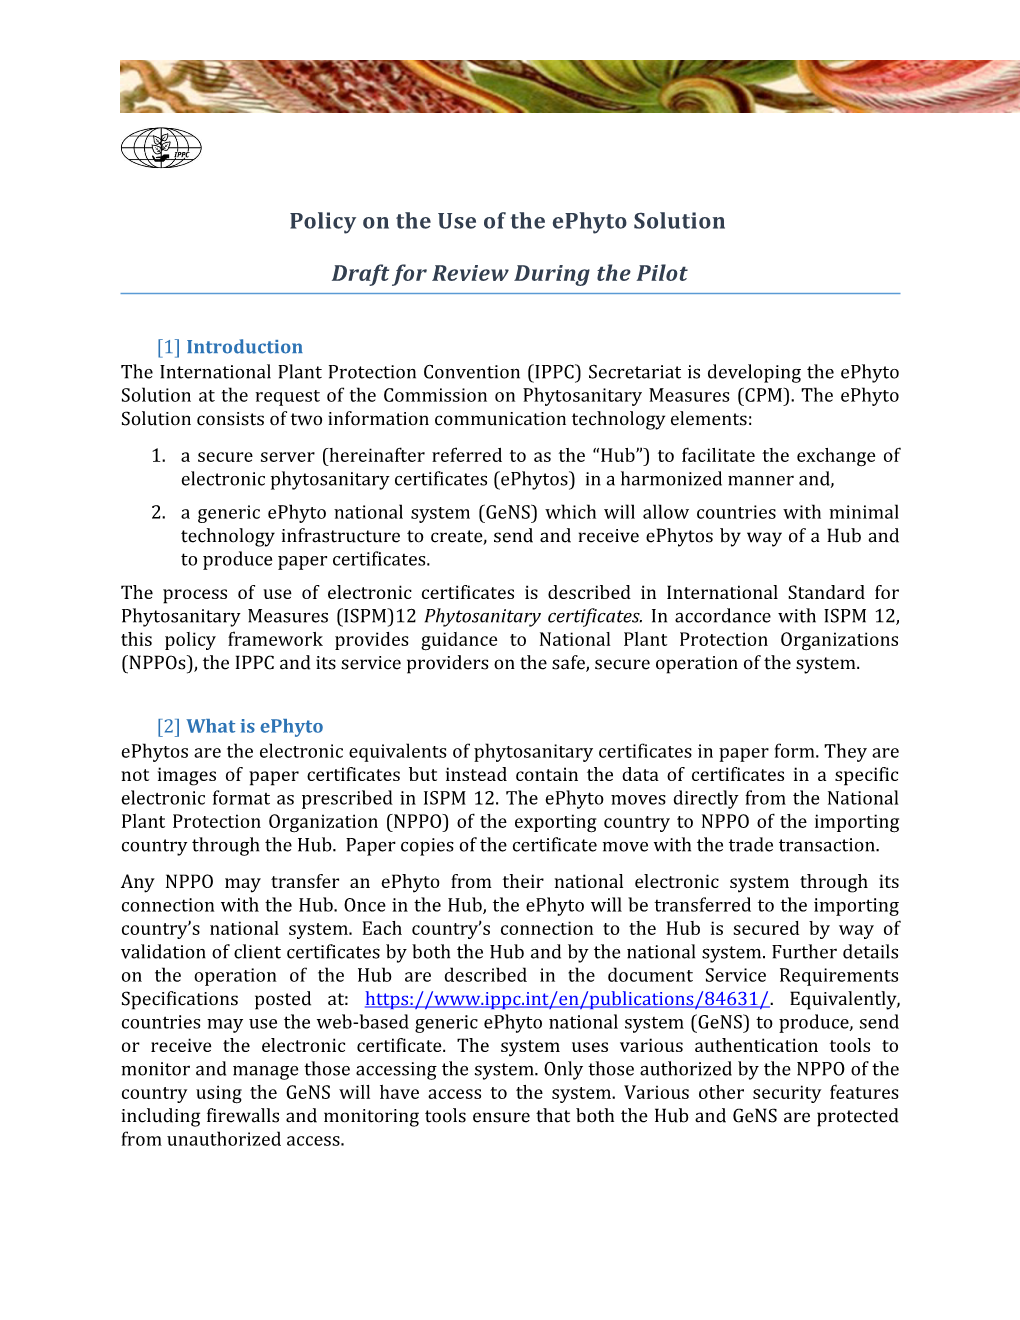 Policy on the Use of the Ephyto Solution